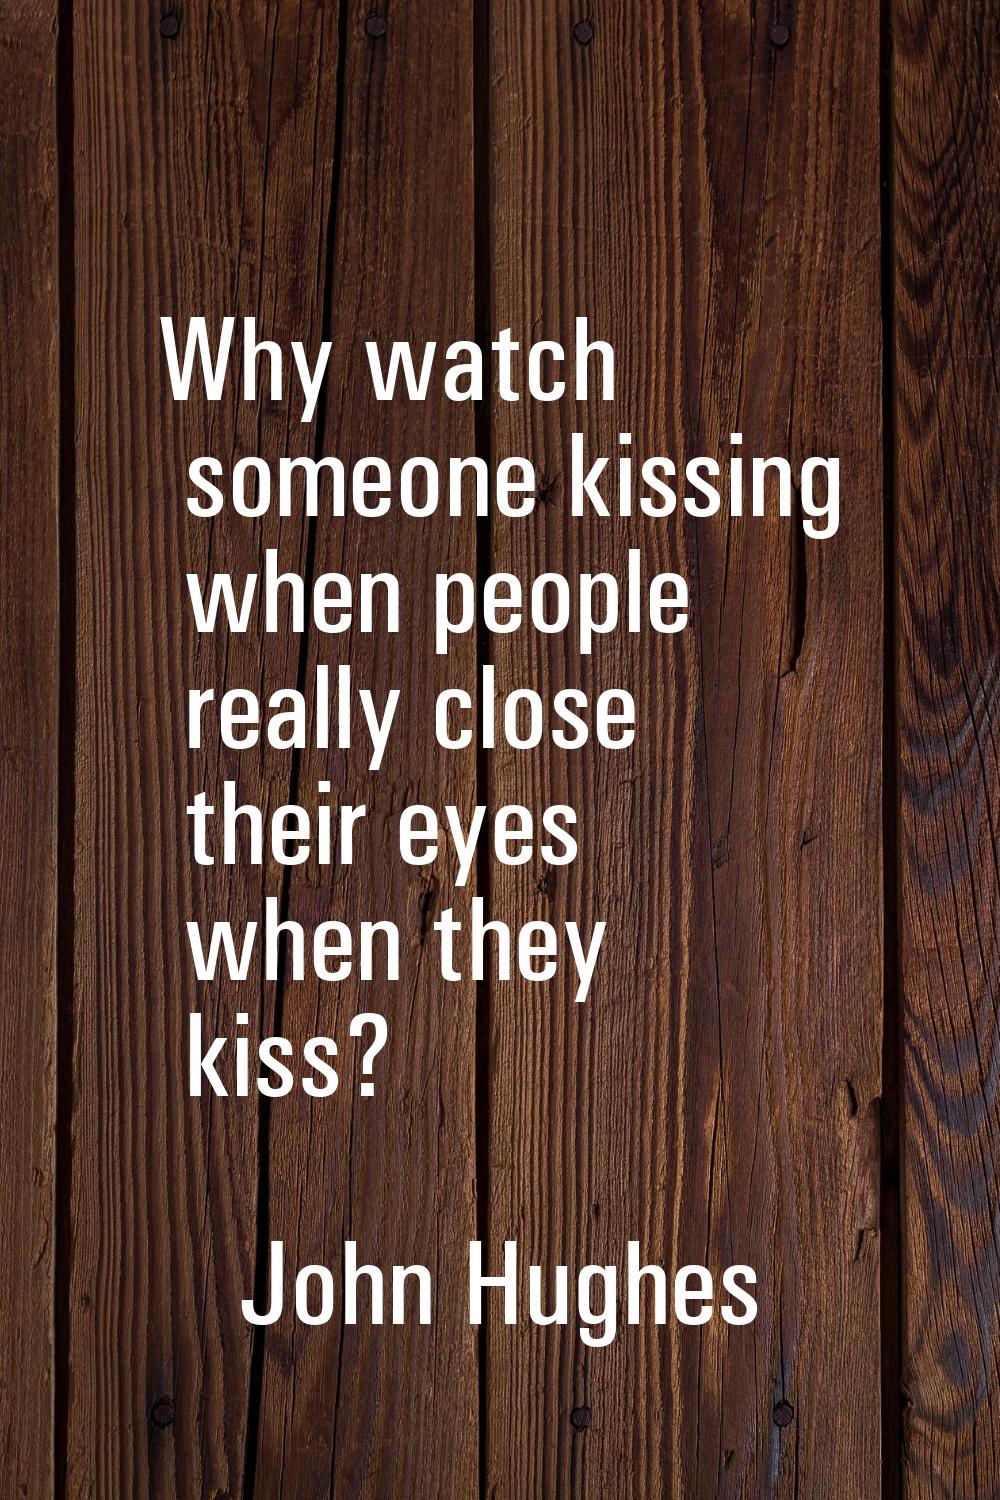 Why watch someone kissing when people really close their eyes when they kiss?